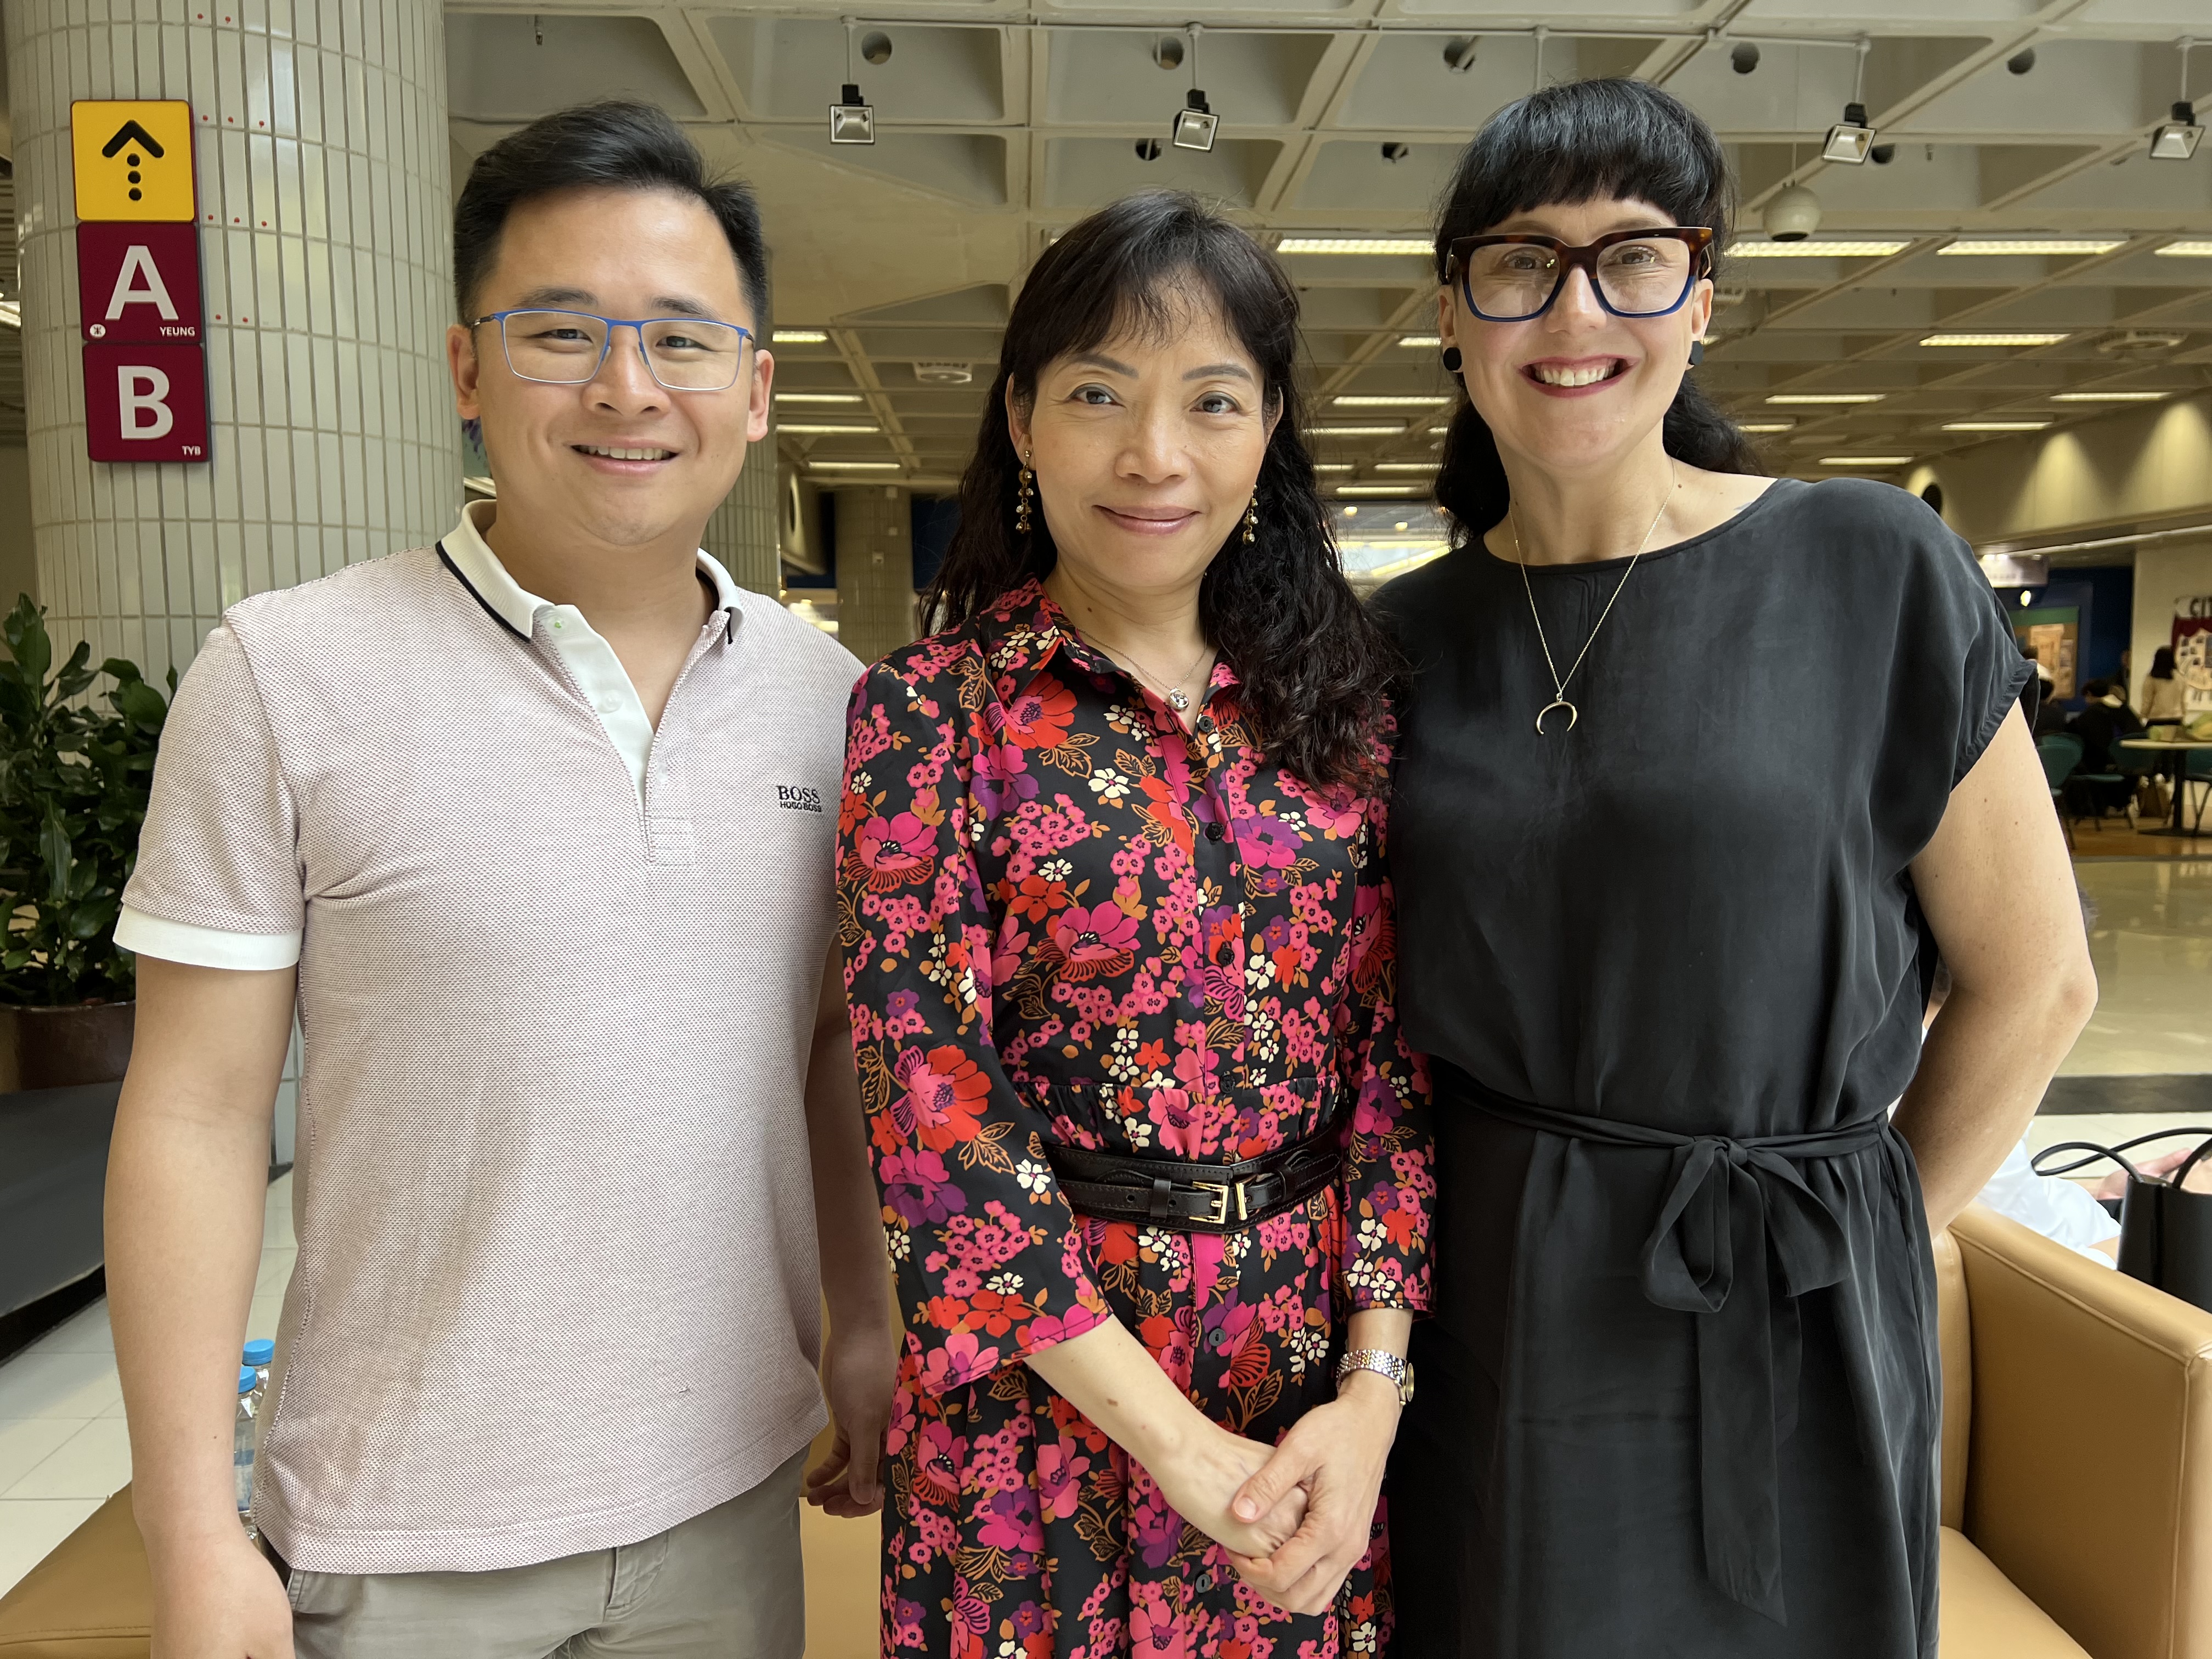 Collaboration between CityU SCOPE and GradConnection